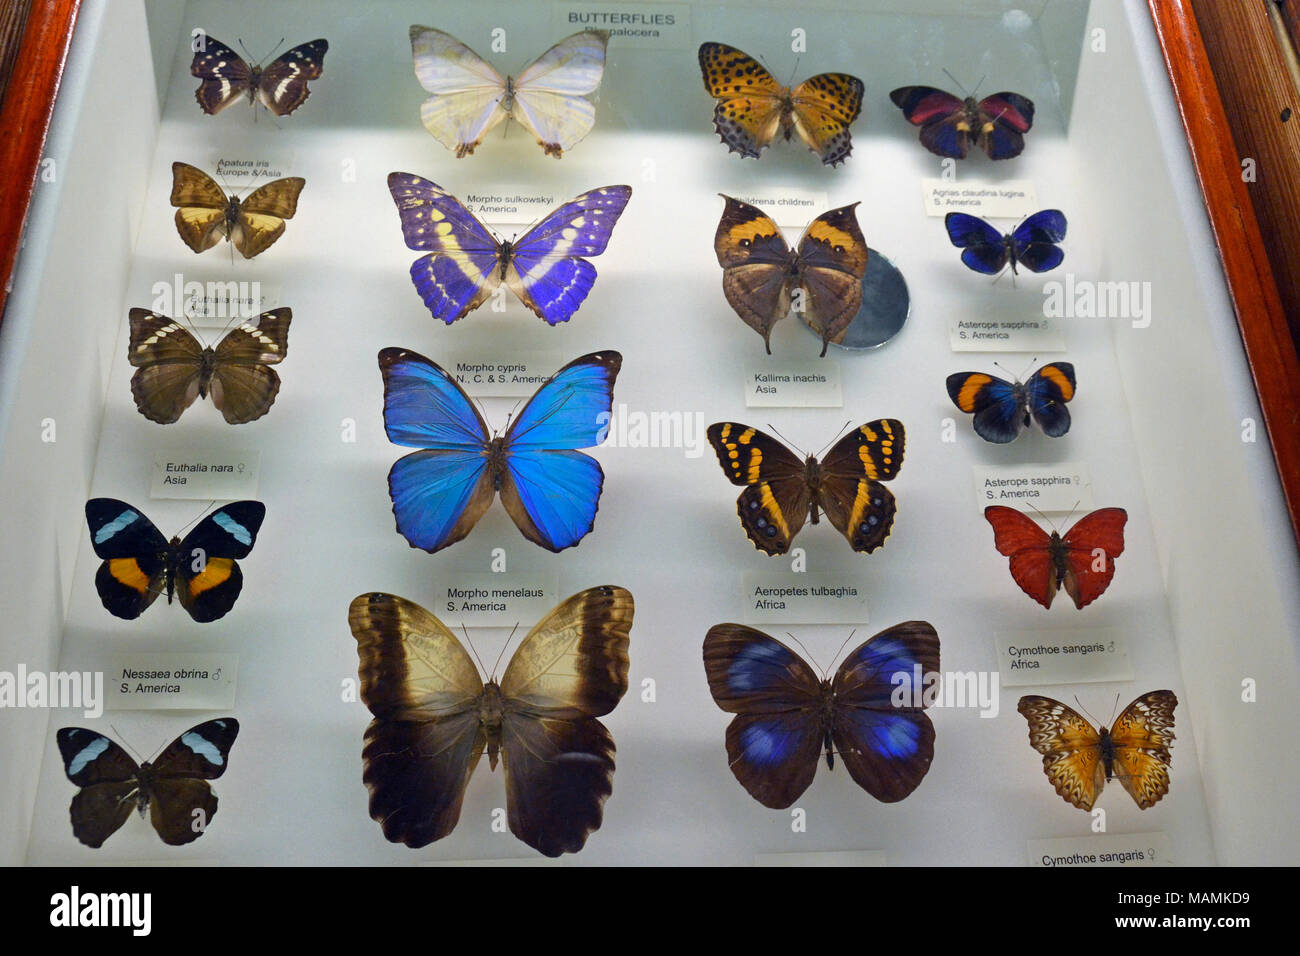 Butterfly display cabinet at the Natural History Museum at Tring, UK. Stock Photo